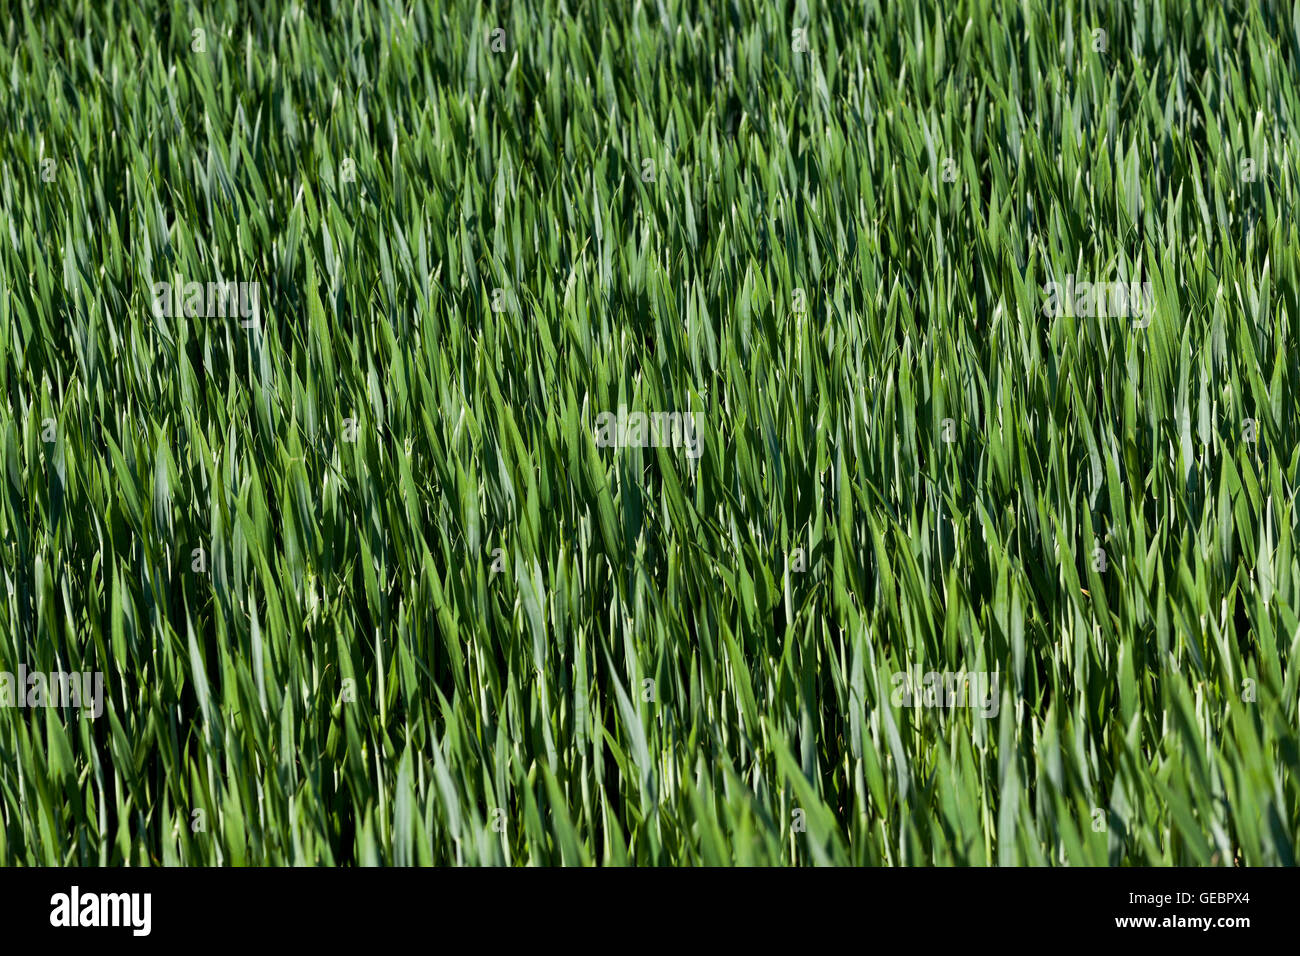 Leaves of wheat. close-up Stock Photo